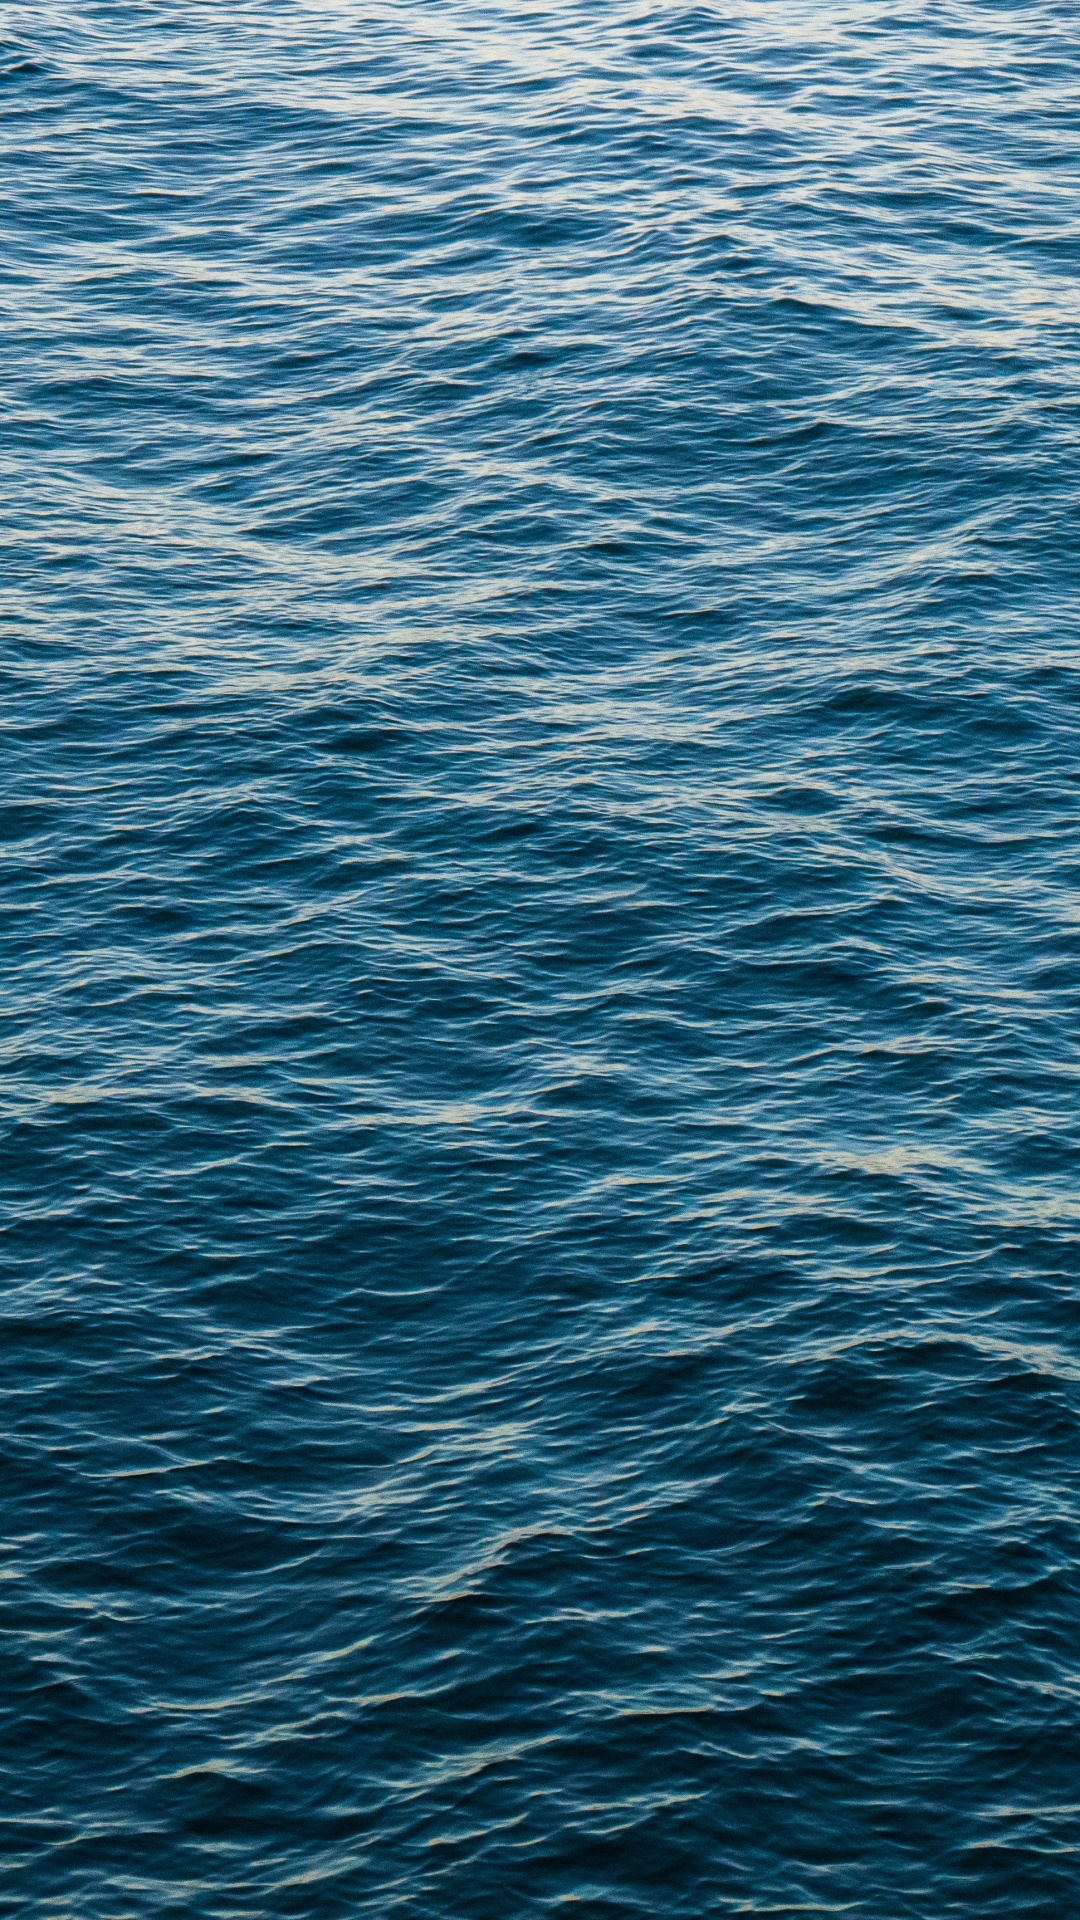 Blue Body of Water During Daytime. Wallpaper in 1080x1920 Resolution